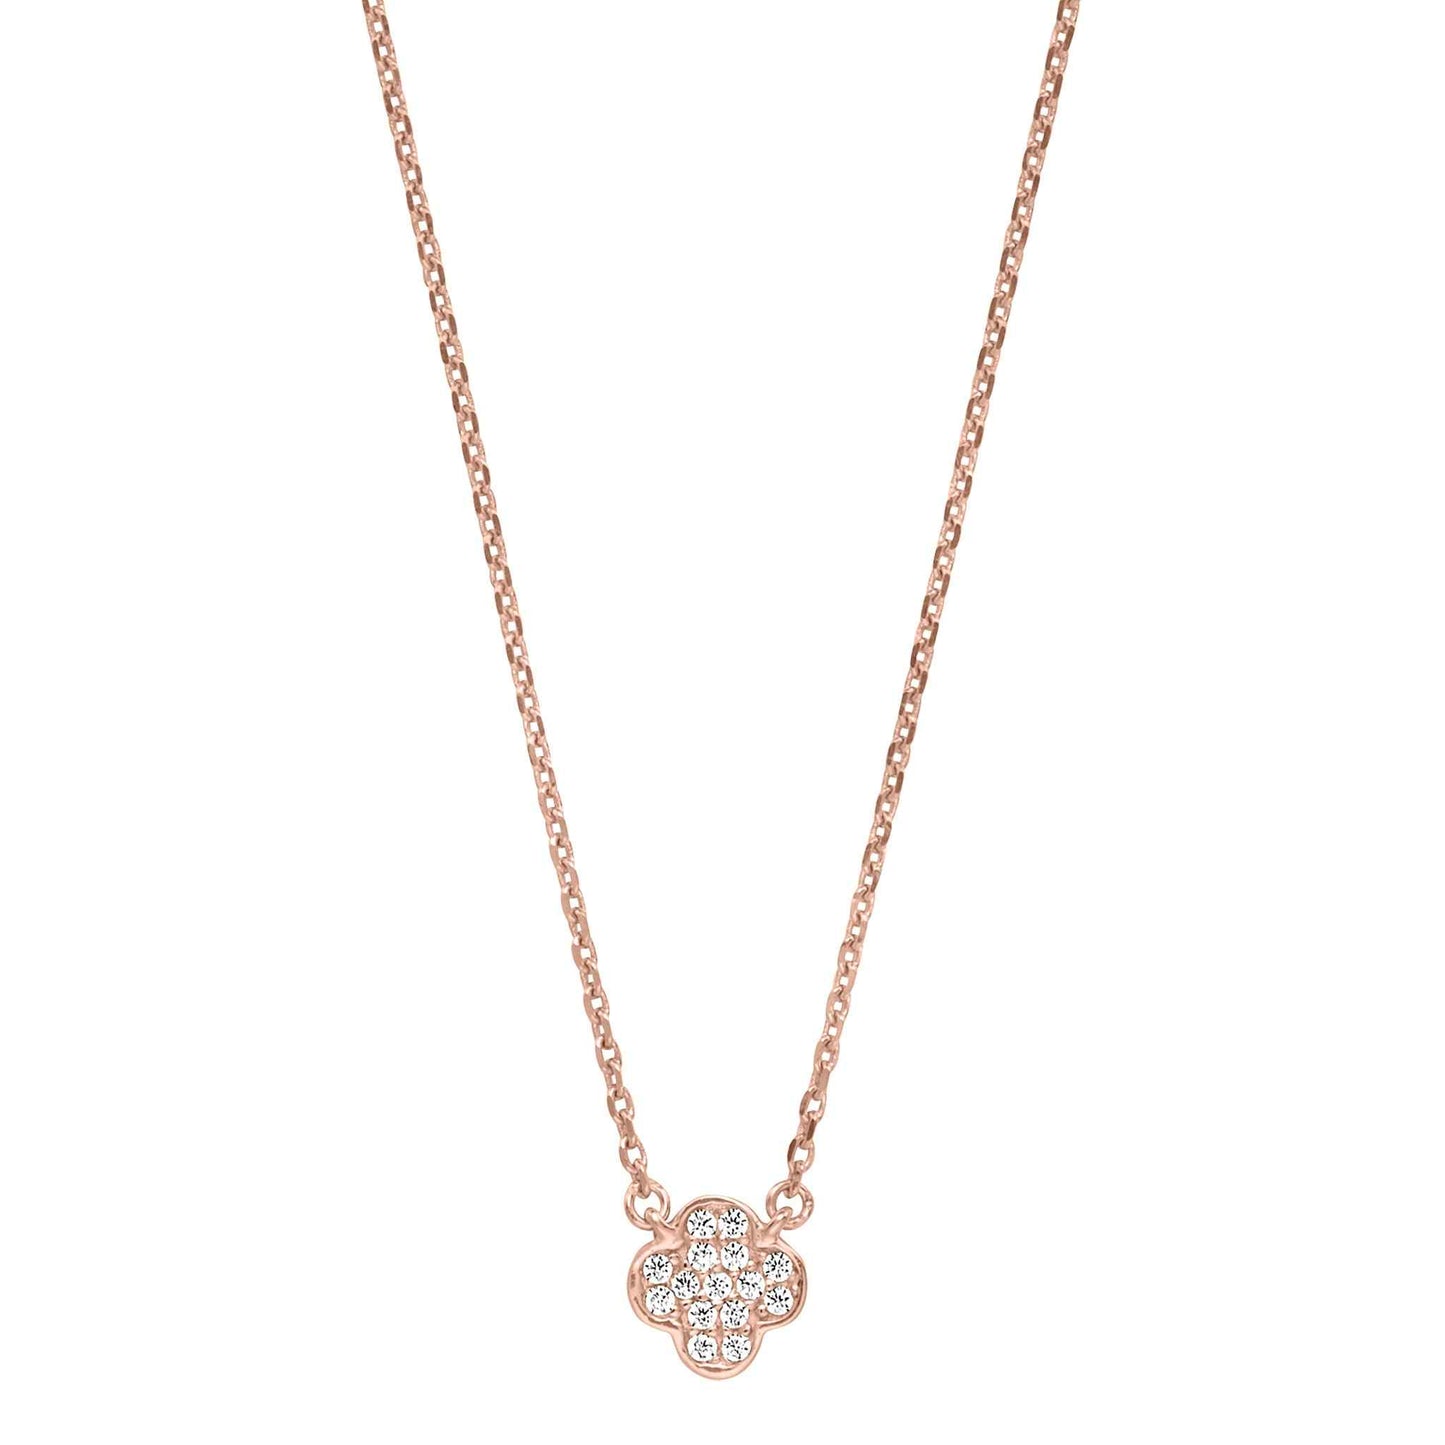 A clover necklace with simulated diamonds displayed on a neutral white background.